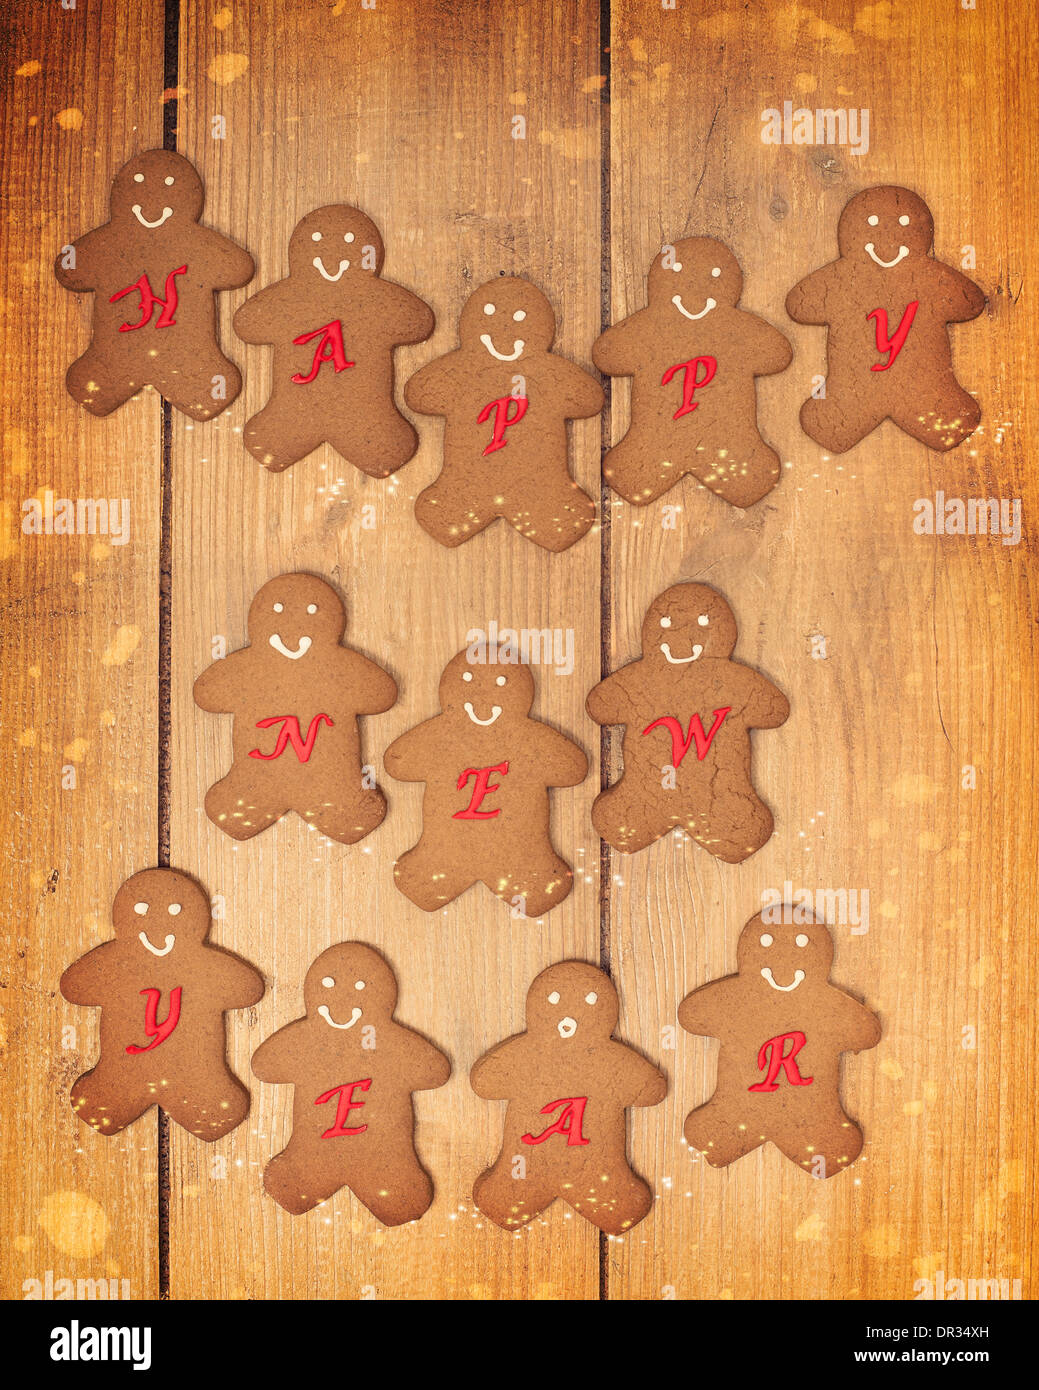 Homemade festive gingerbread men for the New Year Stock Photo